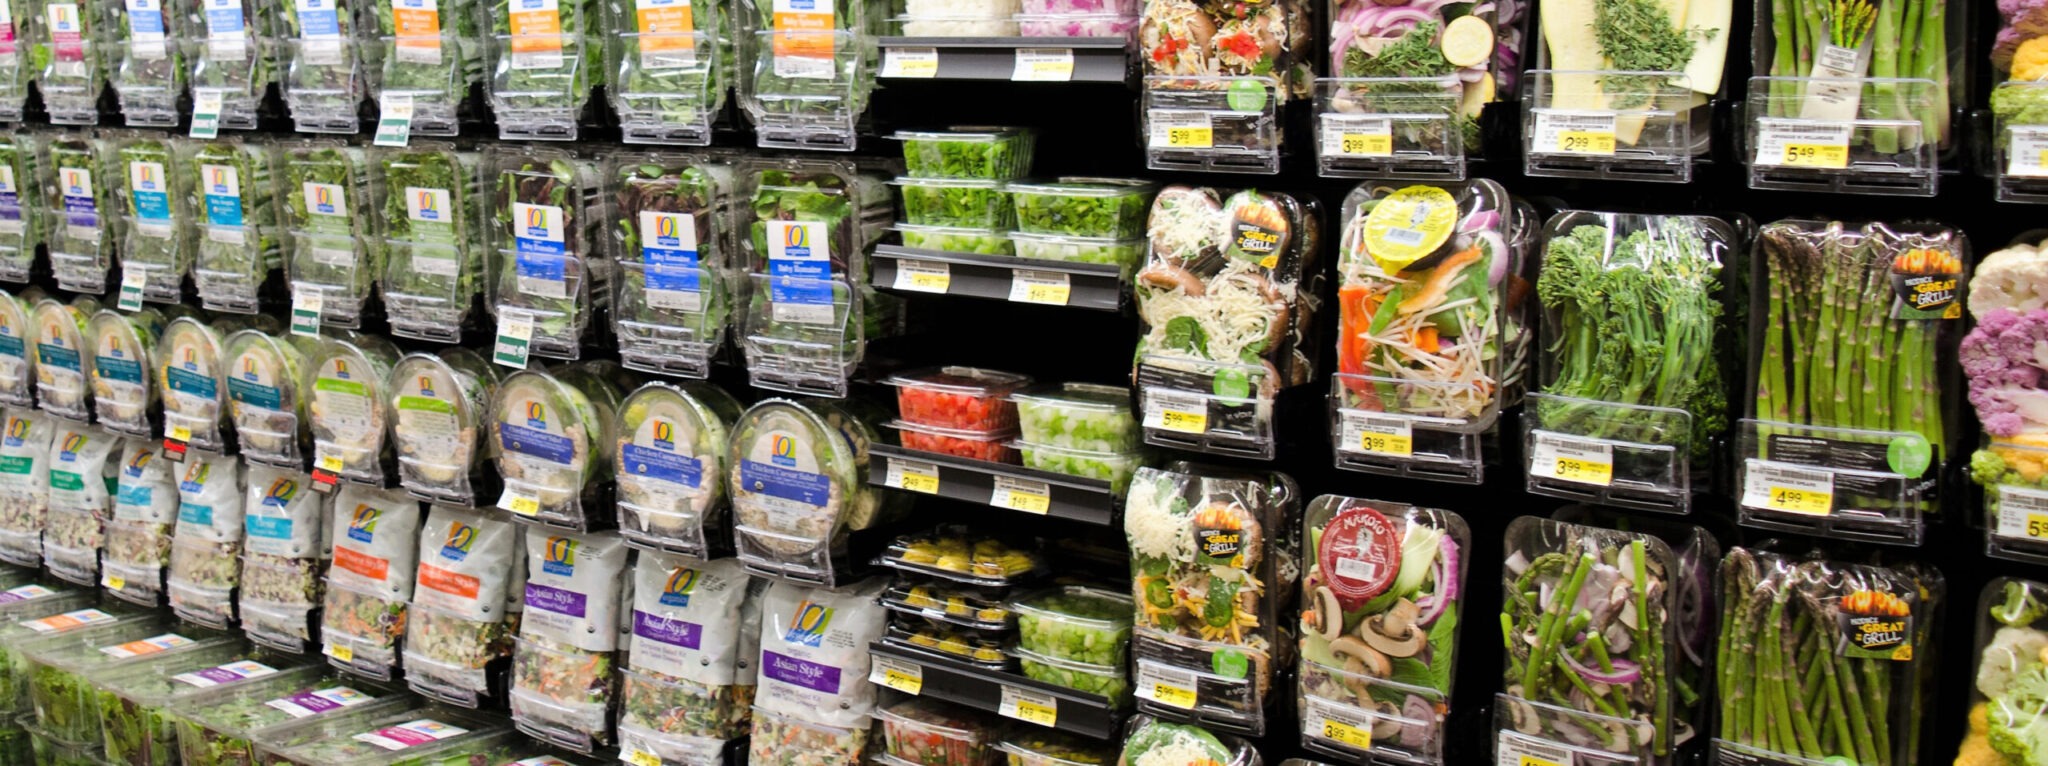 Salad on shelves in the store